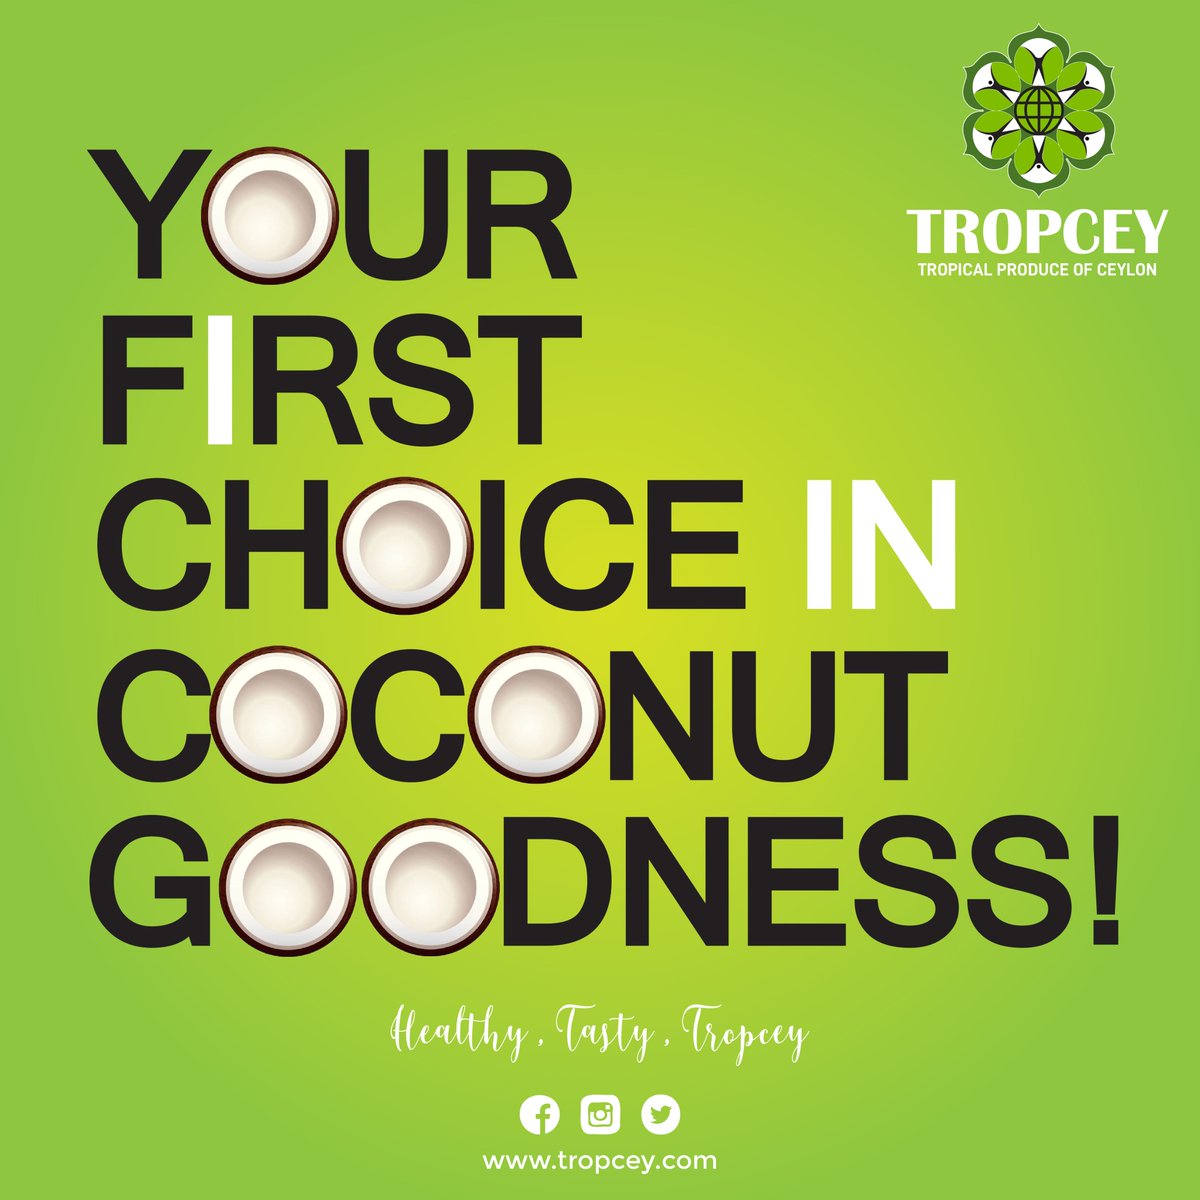 Your First Choice In Coconut Goodness... 😊🥥
#FirstChoice #coconutgoodness #tropceyexport #madeinsrilanka #coconutoil #coconutwater #coconutmilk #coconutchips #coconut #coconutproducts #coconutindustry #tropical